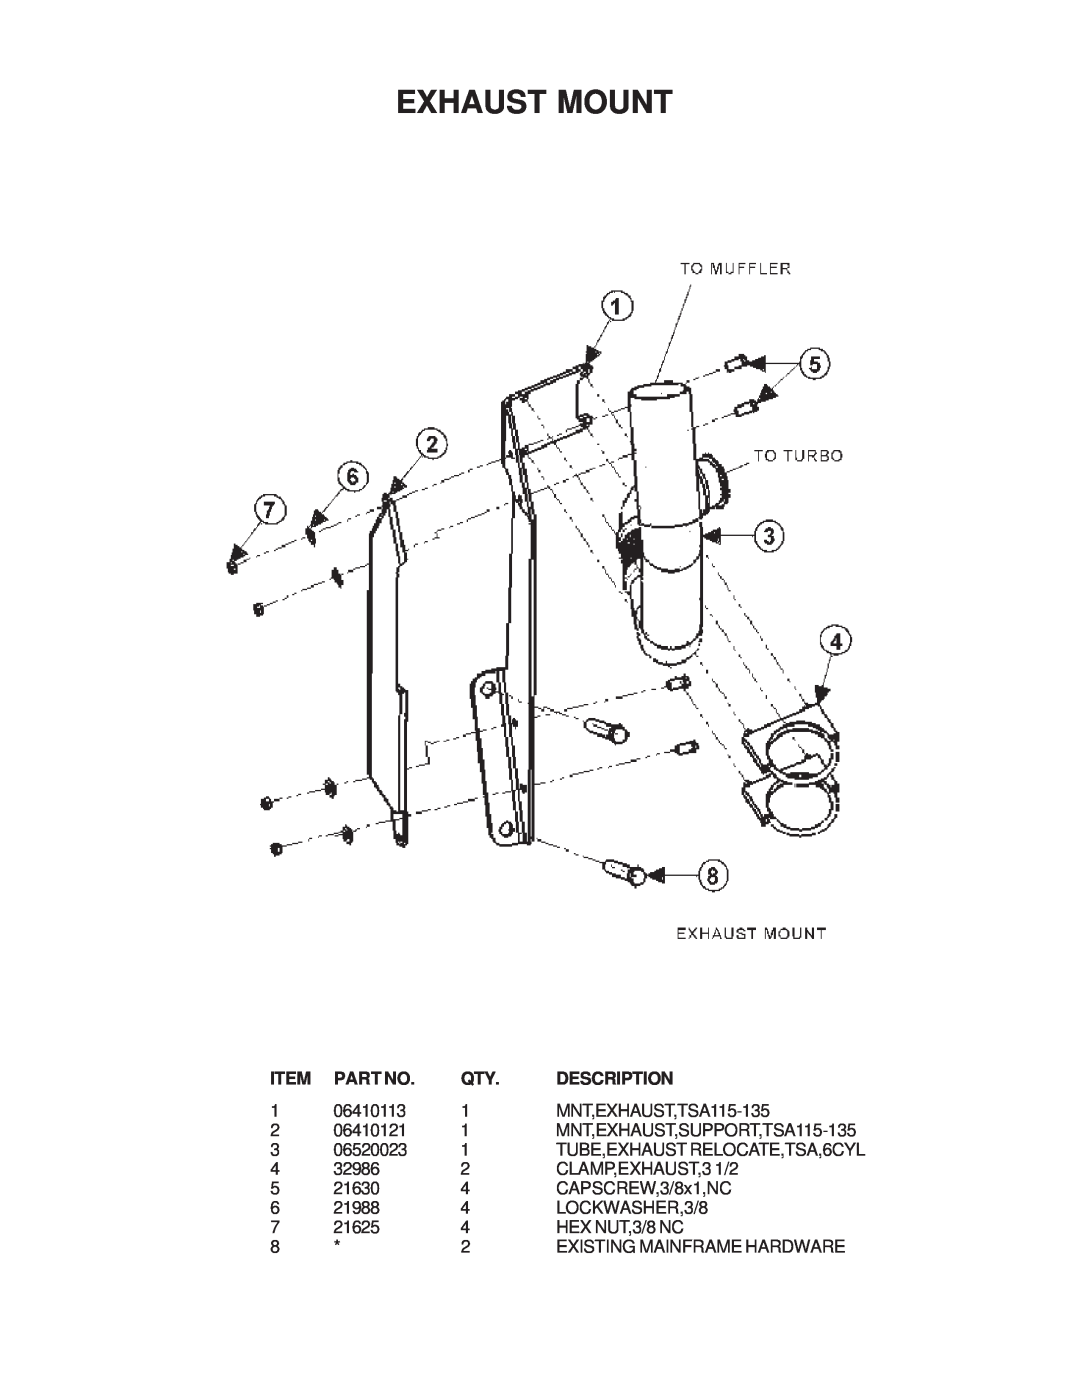 Tiger Products Co., Ltd 6020009 manual Exhaust Mount, Description, TUBE,EXHAUST RELOCATE,TSA,6CYL 